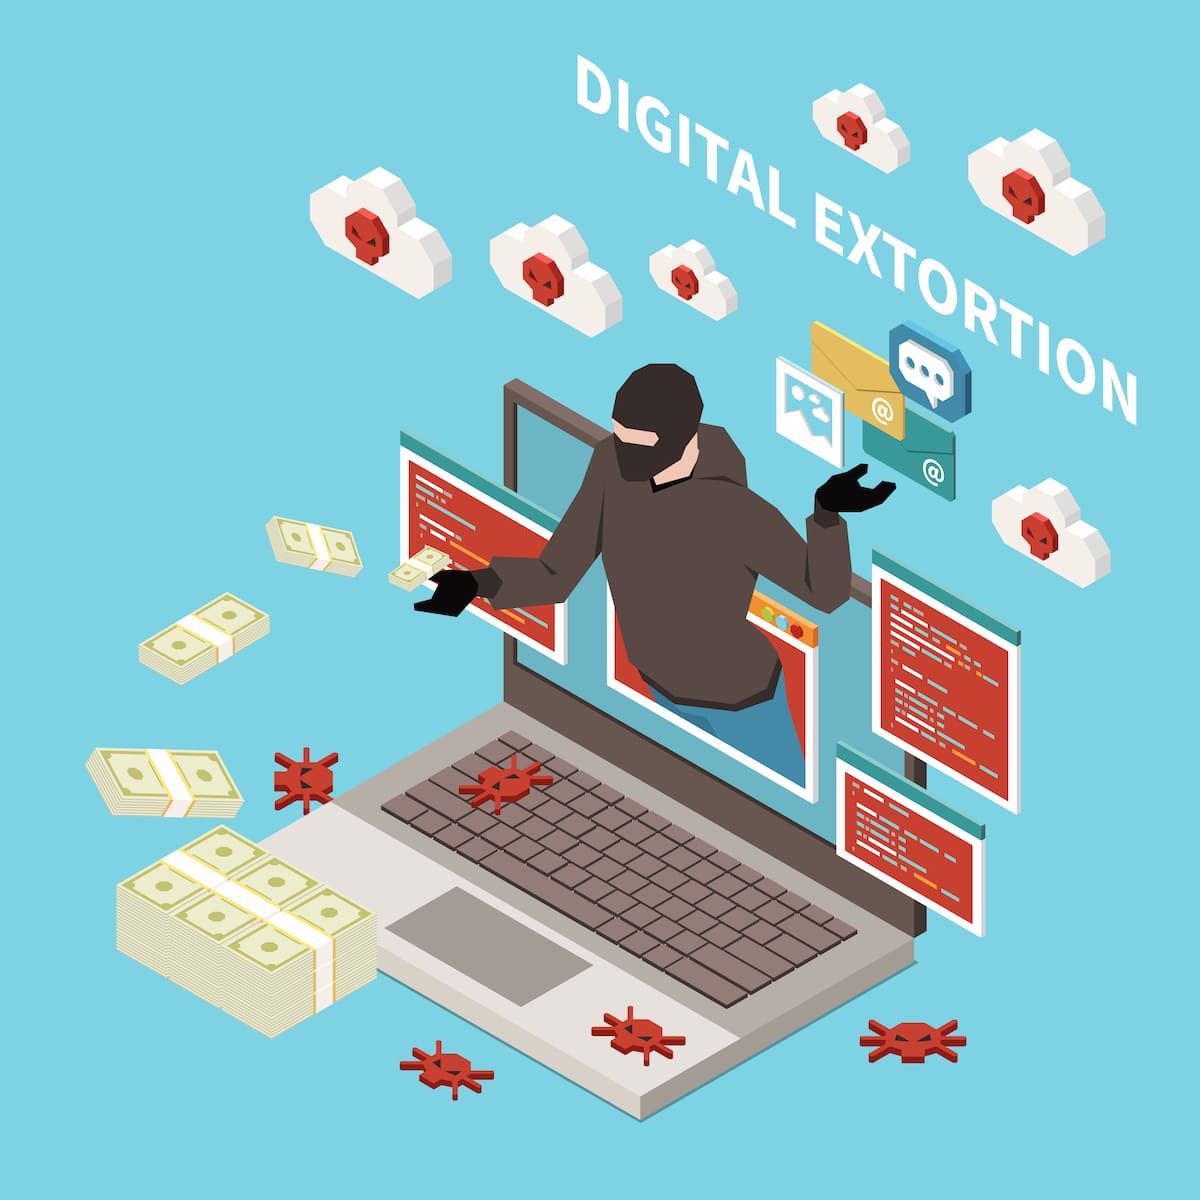 What is online extortion?